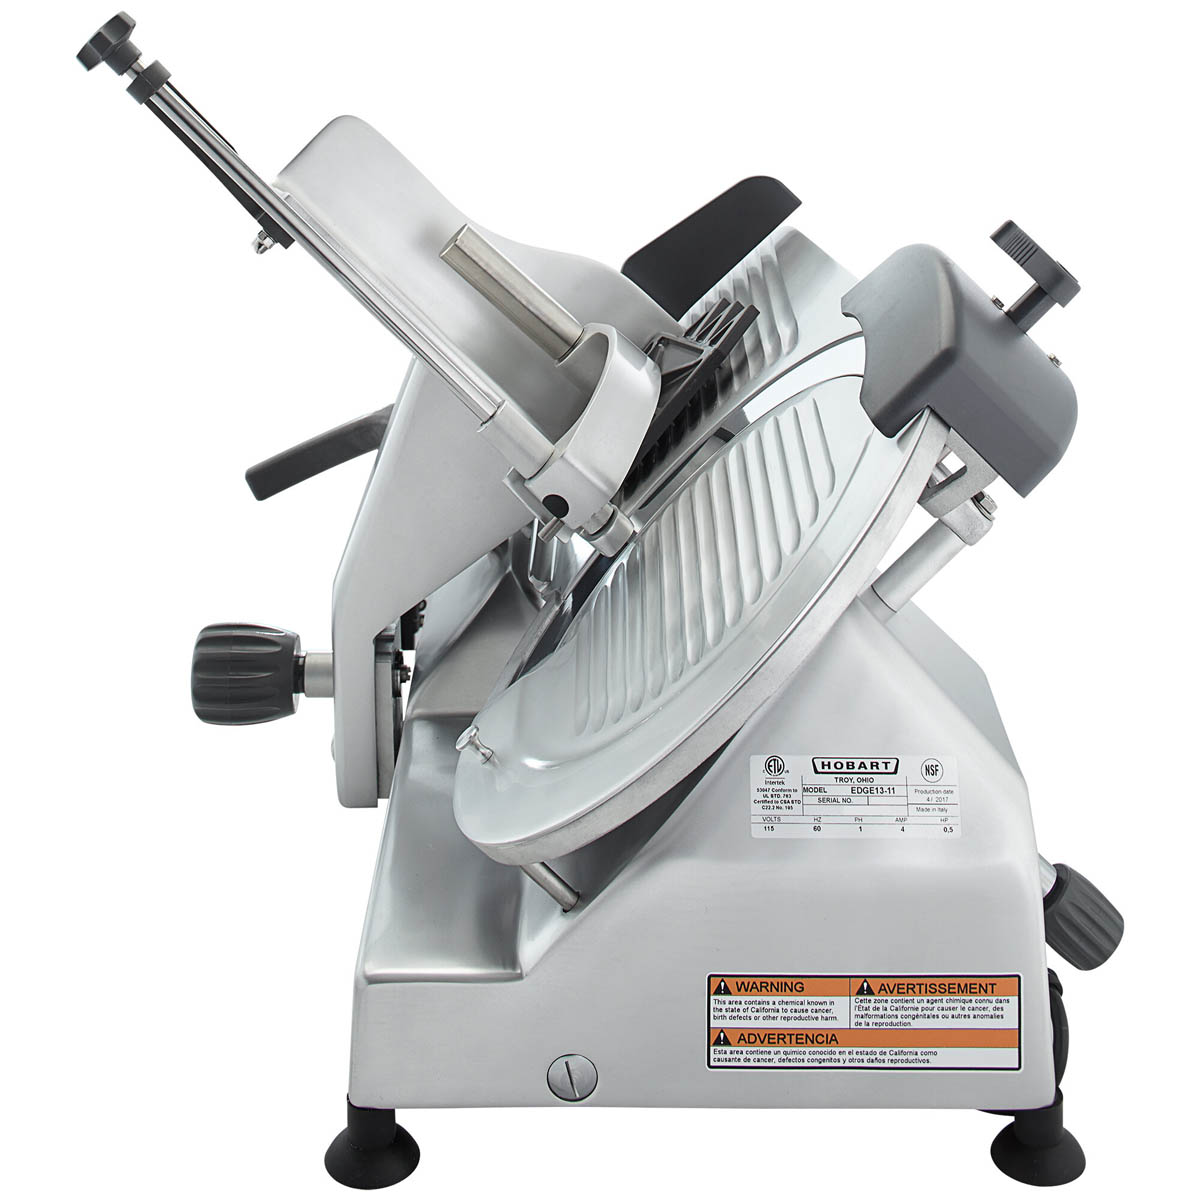 Hobart EDGE13-11 Manual Feed Meat Slicer with 13